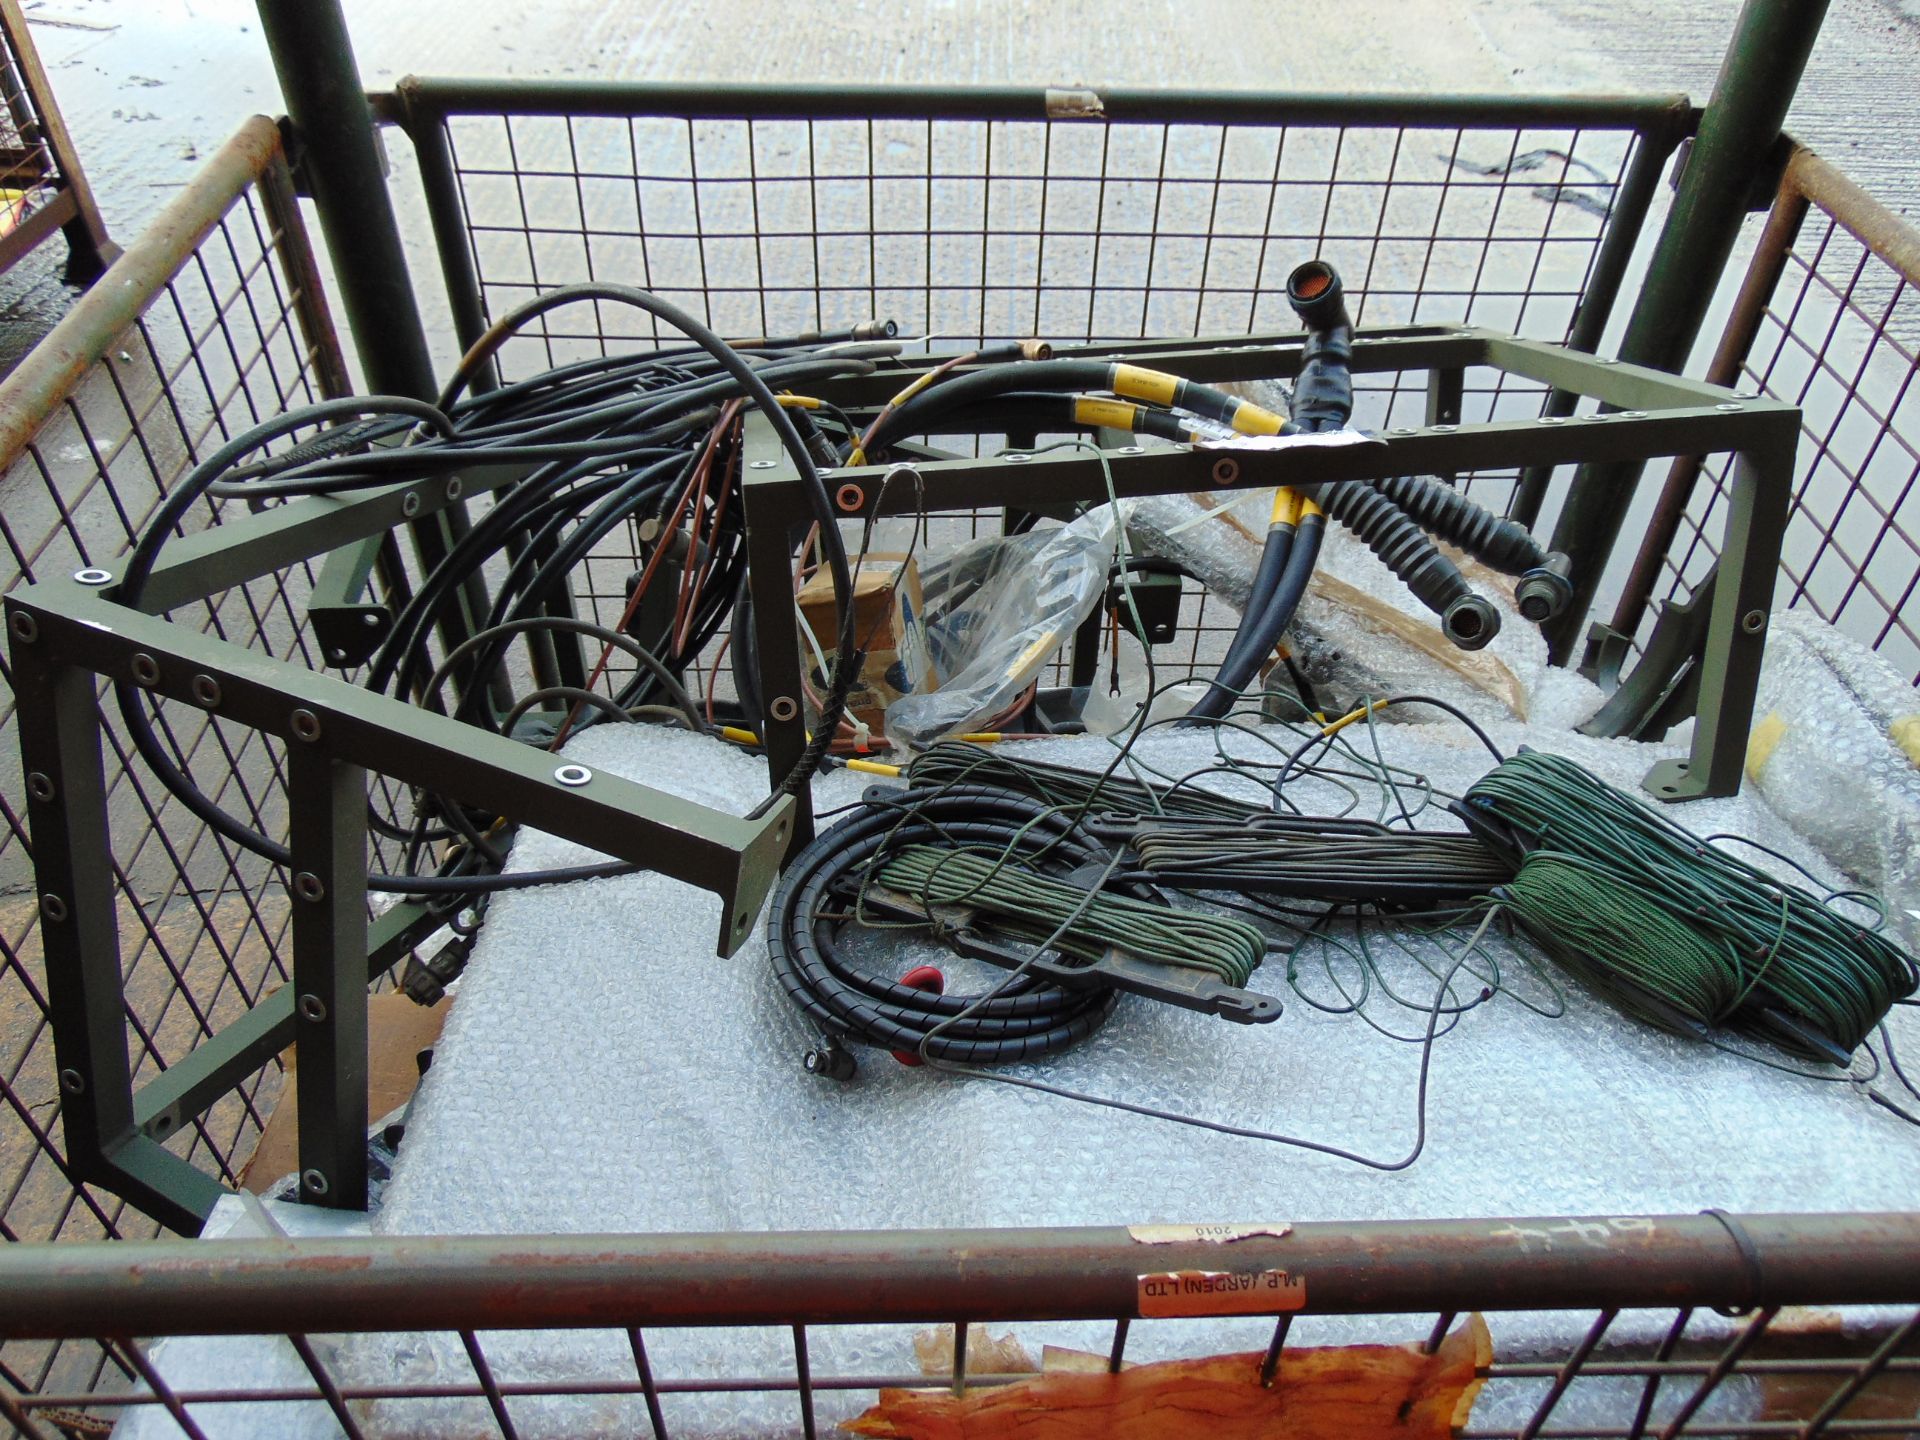 1 x Stillage of Clansman Fitting Kits Cables, Antennas etc - Image 4 of 6